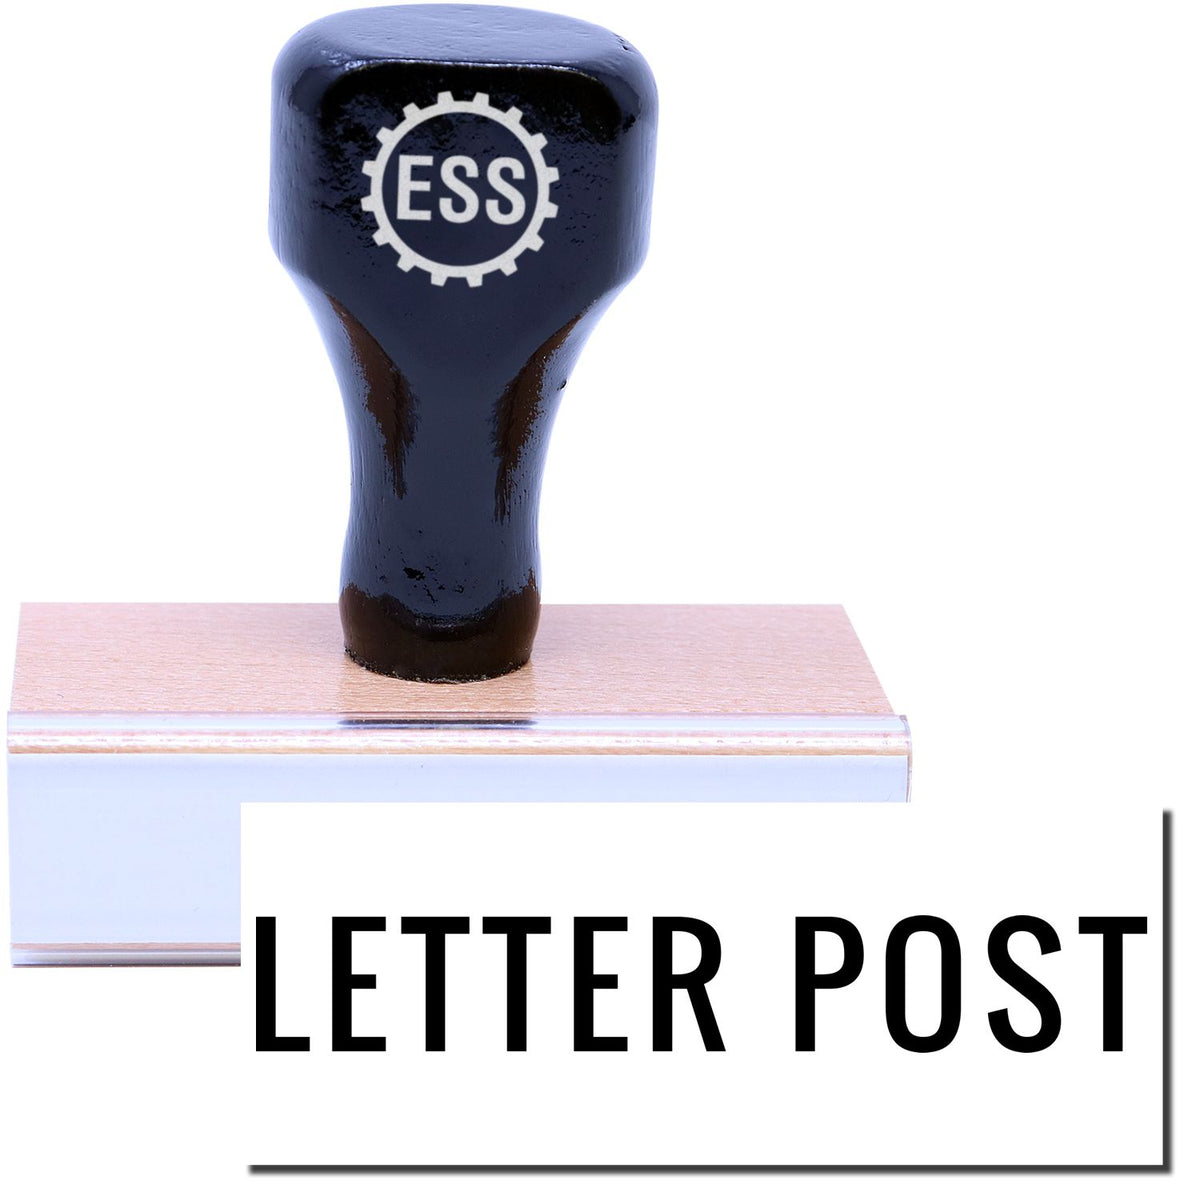 A stock office rubber stamp with a stamped image showing how the text &quot;LETTER POST&quot; in a large font is displayed after stamping.